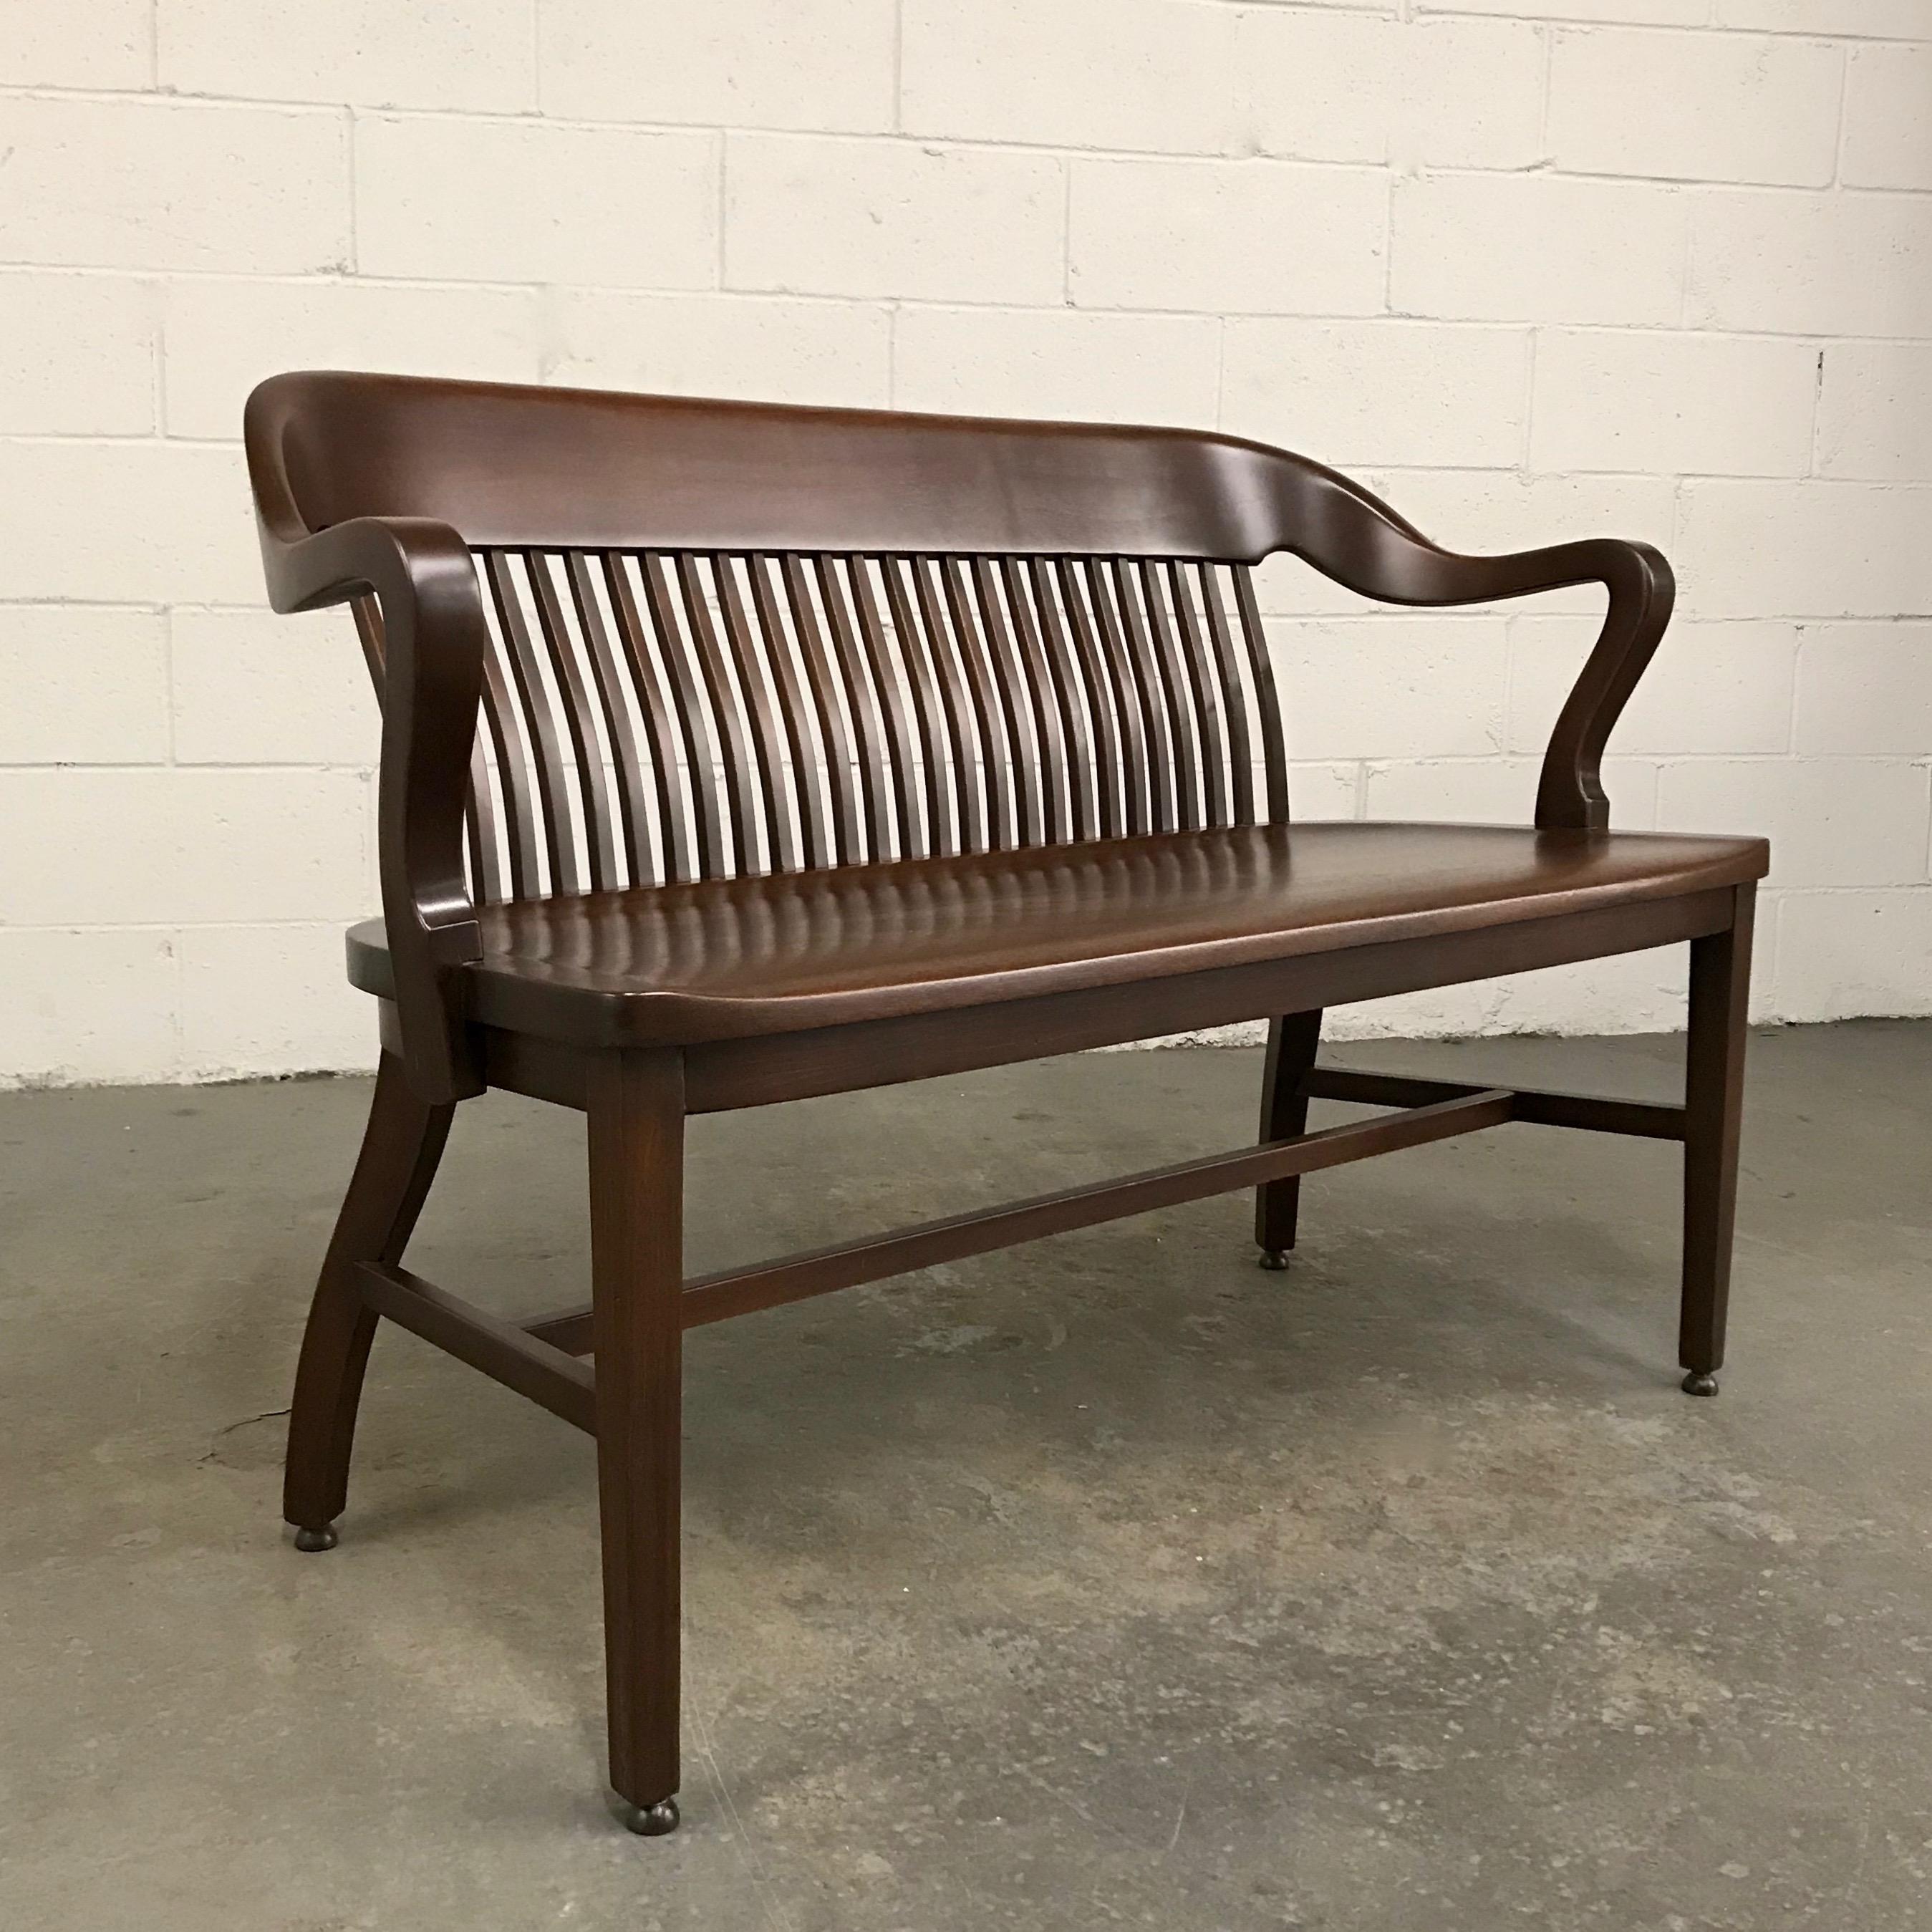 Solid mahogany, midcentury, bank of England bench by Marble & Shattuck.